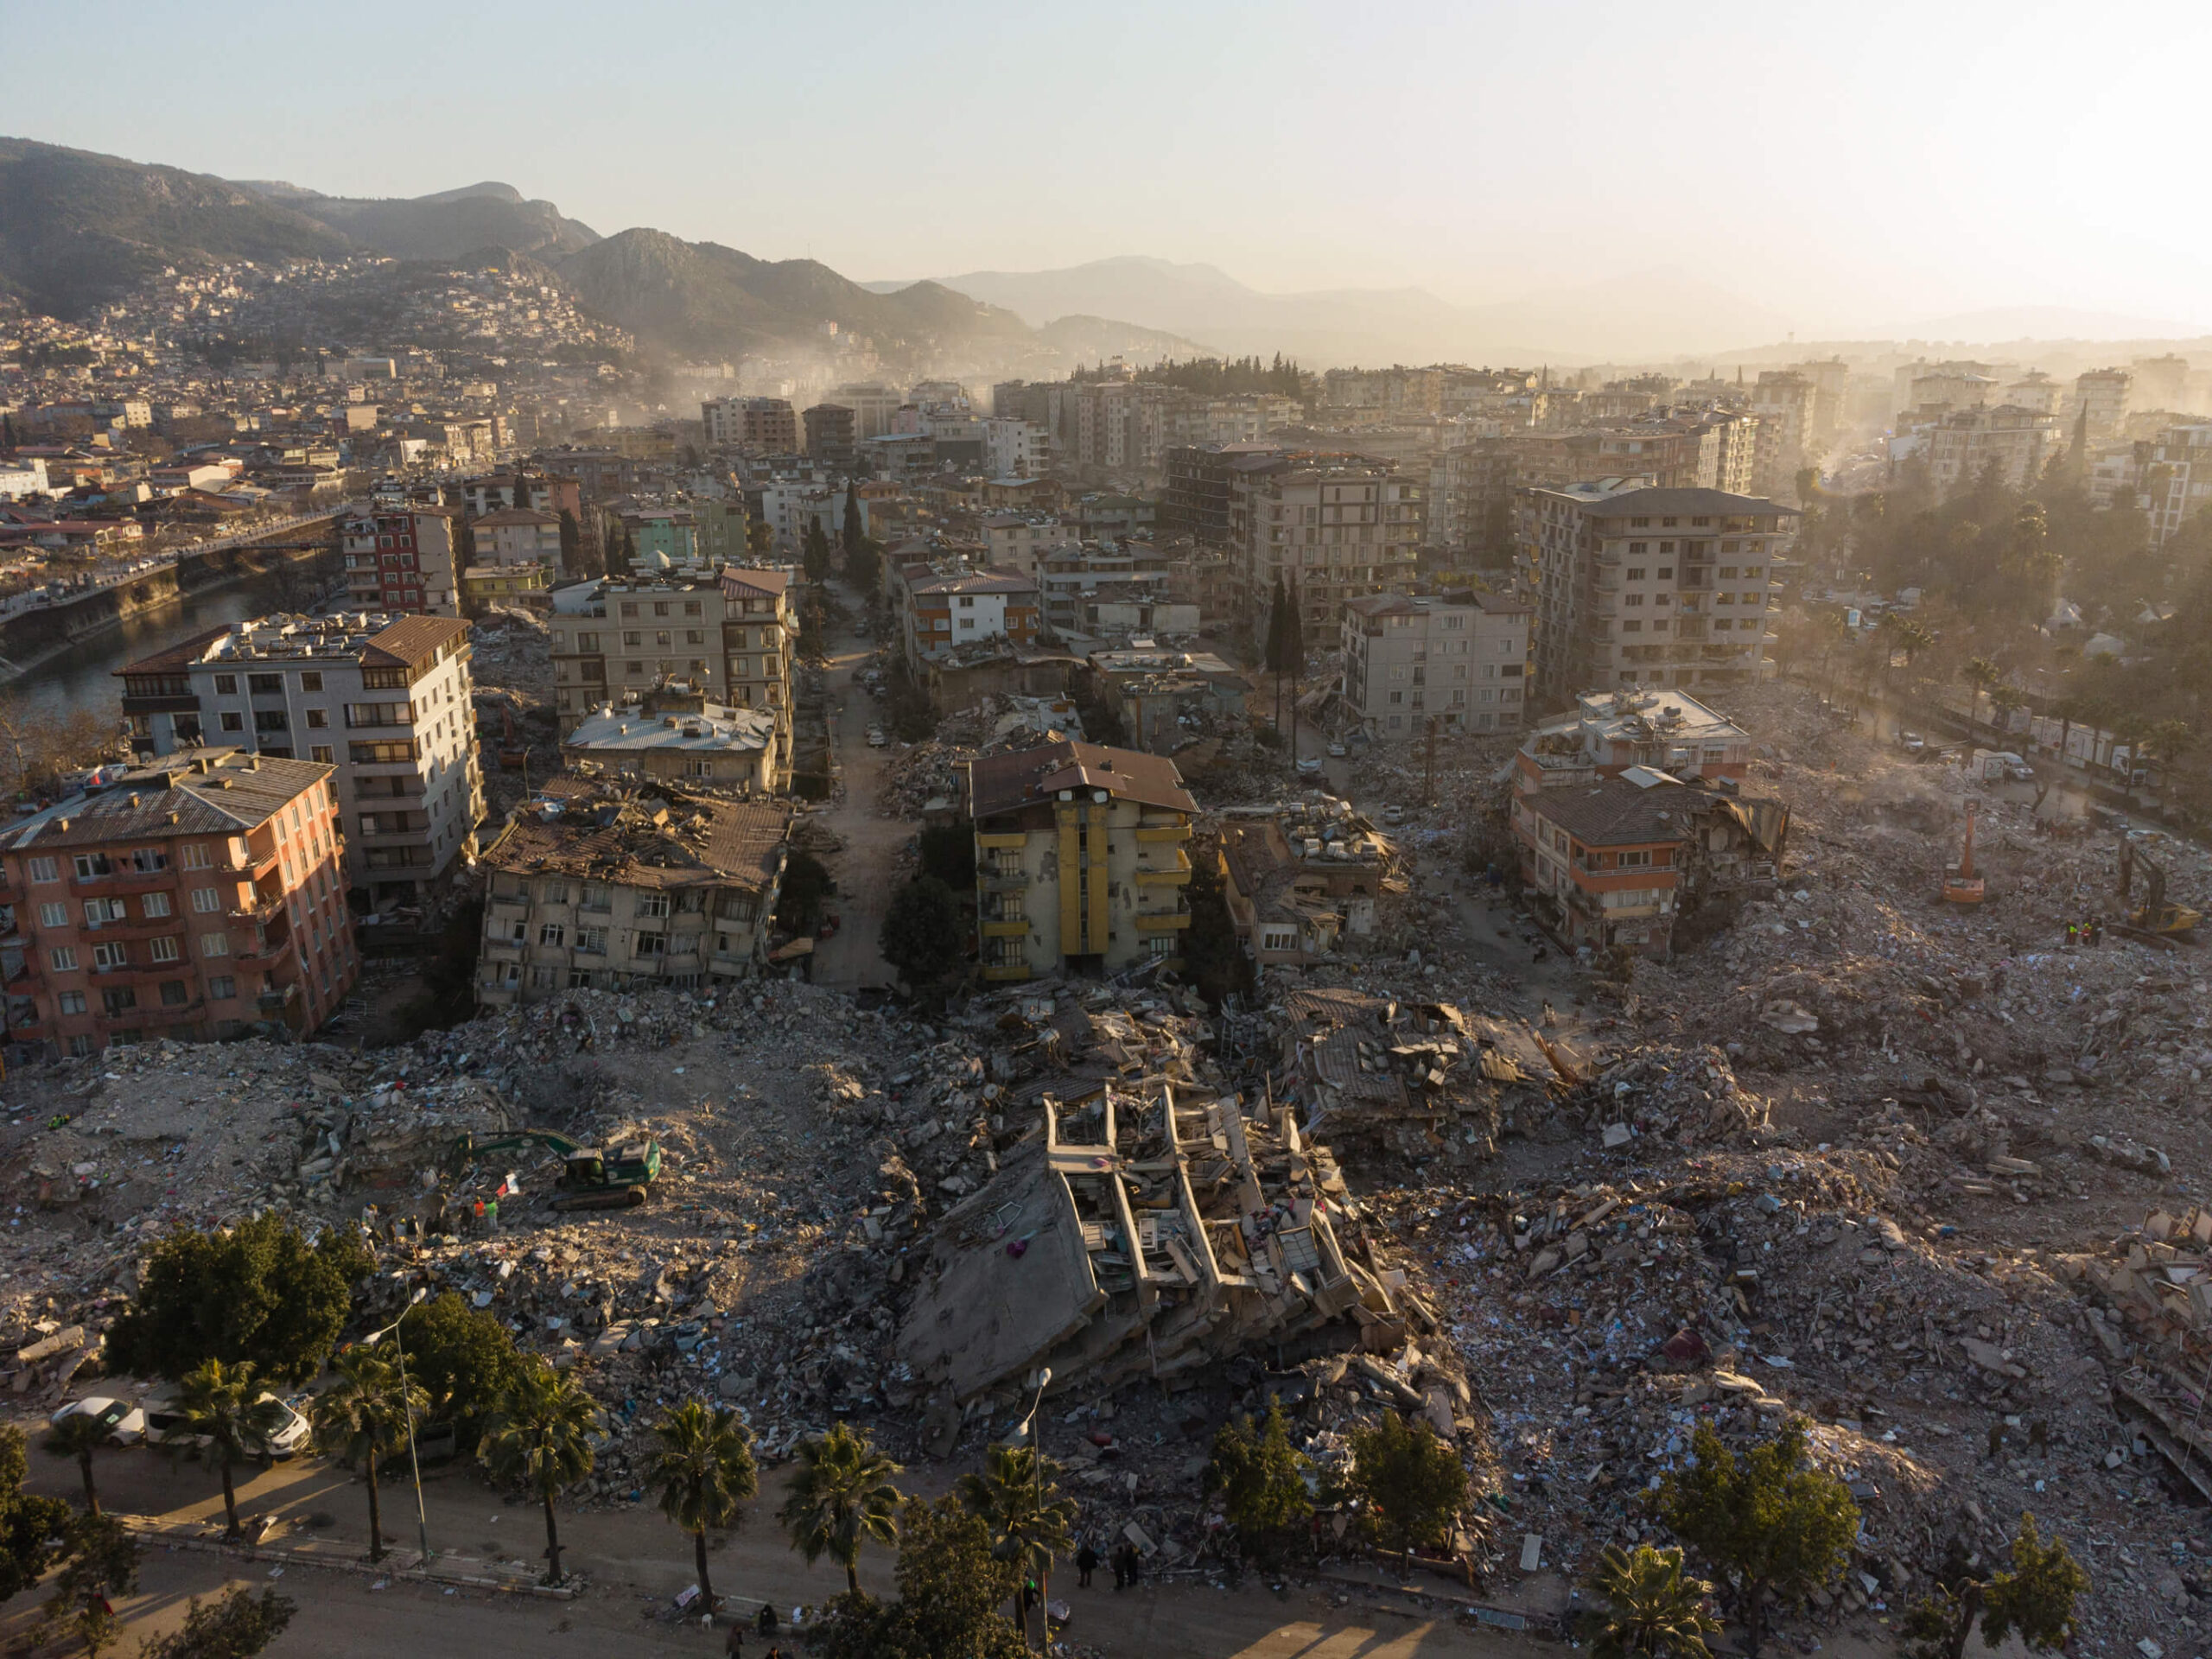 An aerial view of the earthquake destruction in Hatay, Turkey.